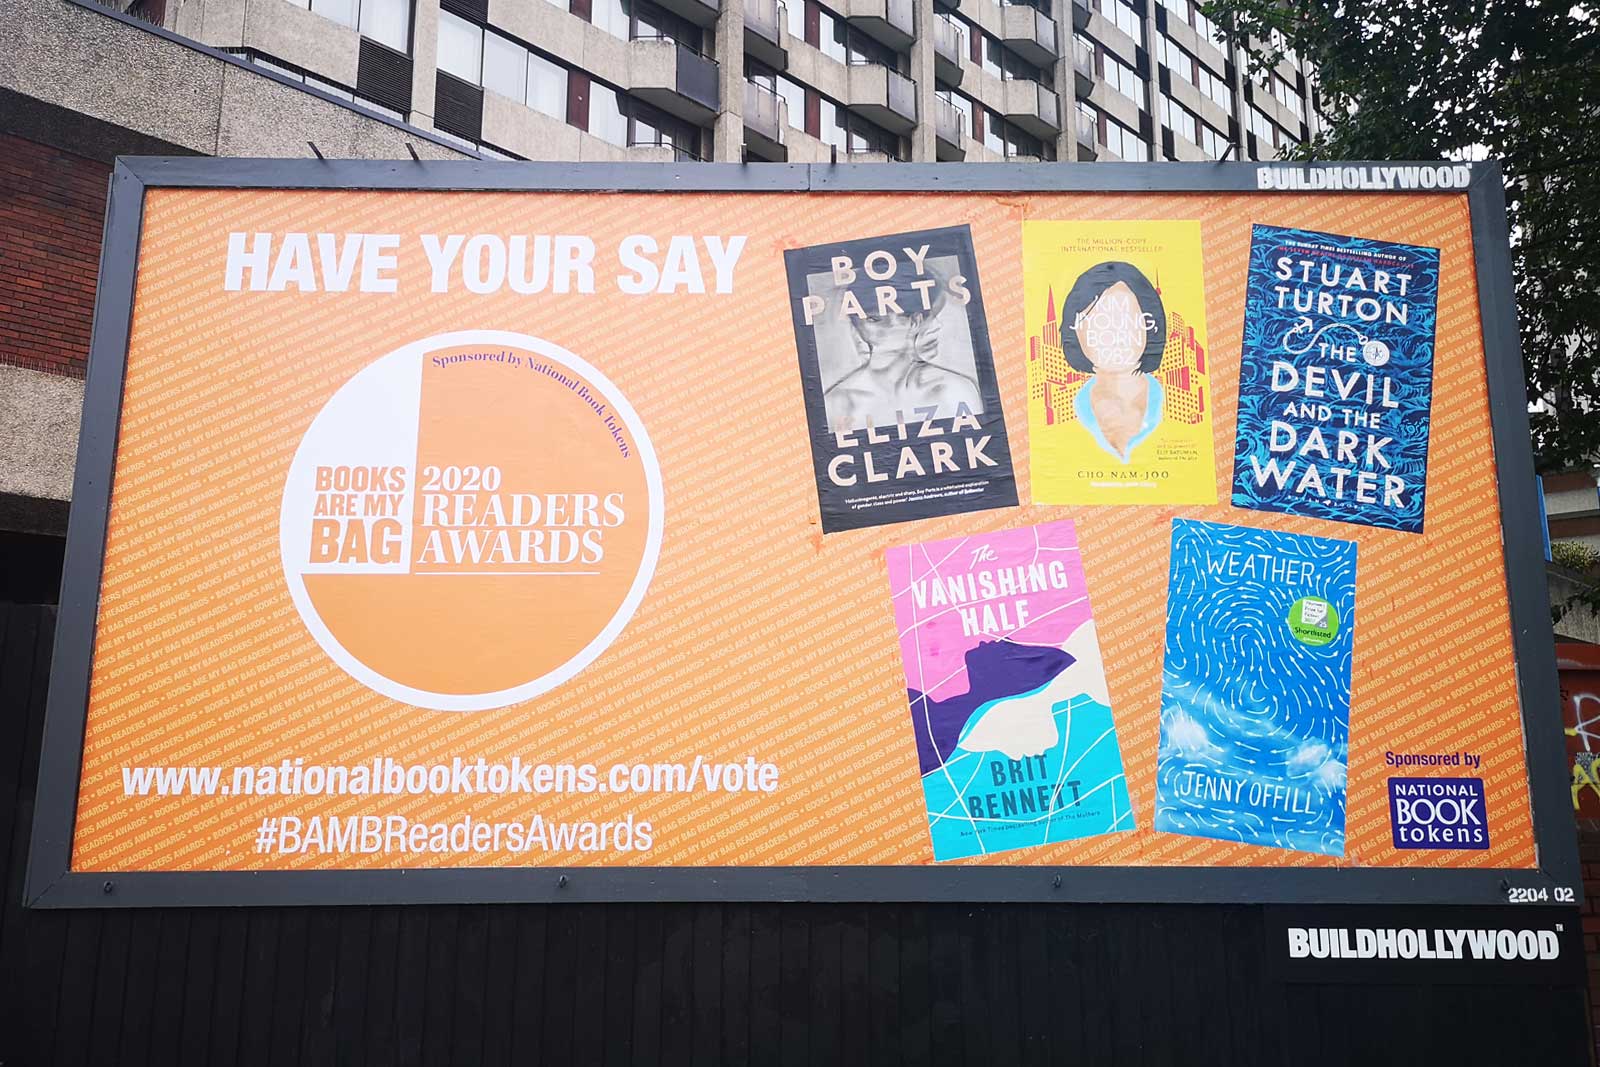 Books Are My Bag: 2020 Readers Awards